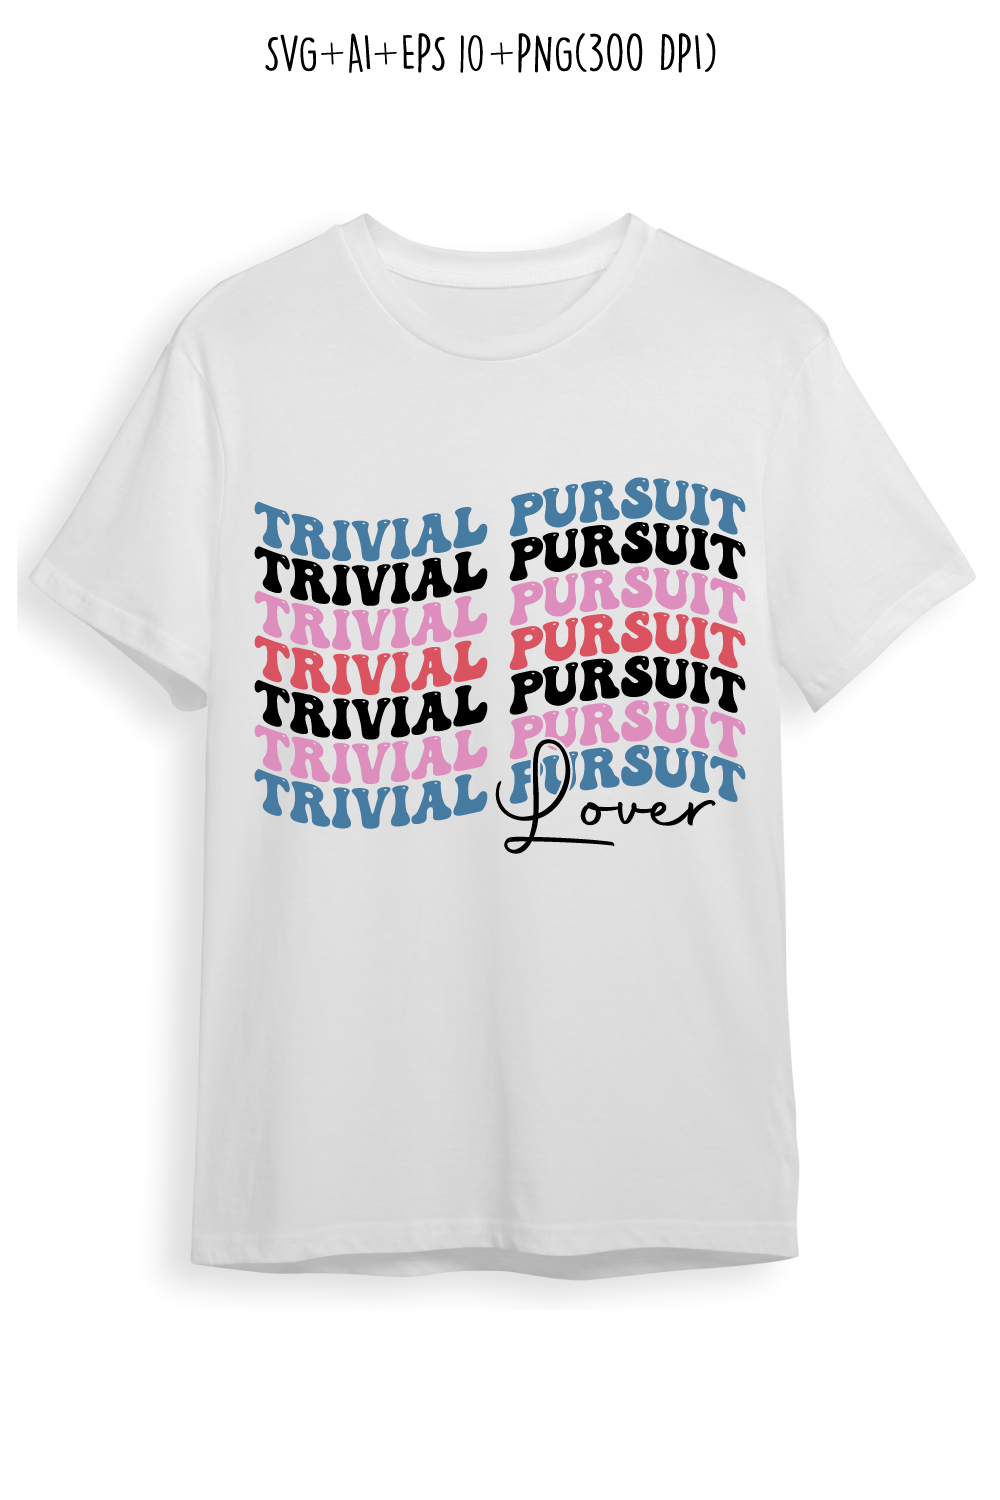 Trivial pursuit lover indoor game retro typography design for t-shirts, cards, frame artwork, phone cases, bags, mugs, stickers, tumblers, print, etc pinterest preview image.